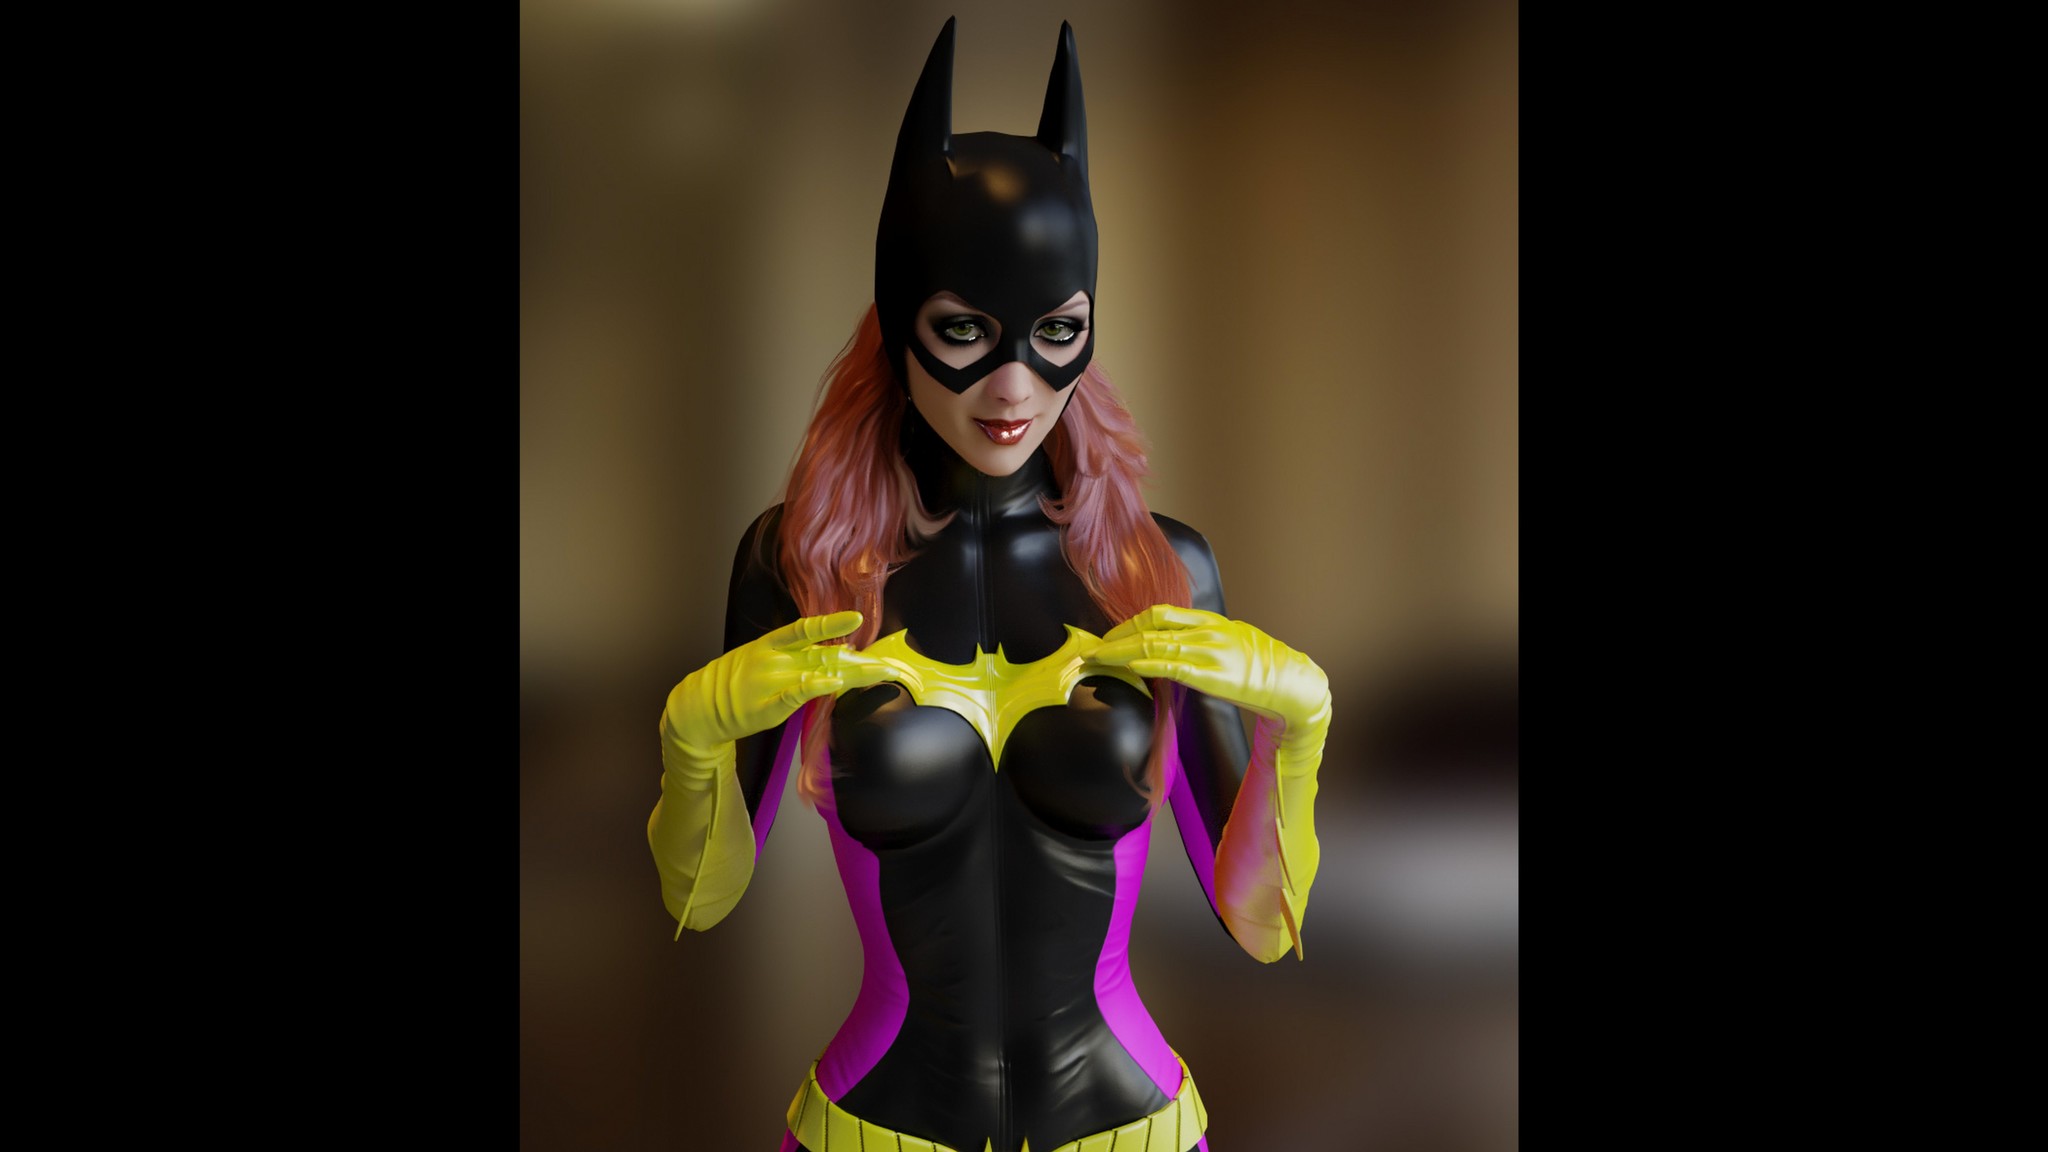 Lexi belle as batgirl: unleashing her superpowers in the bedroom.